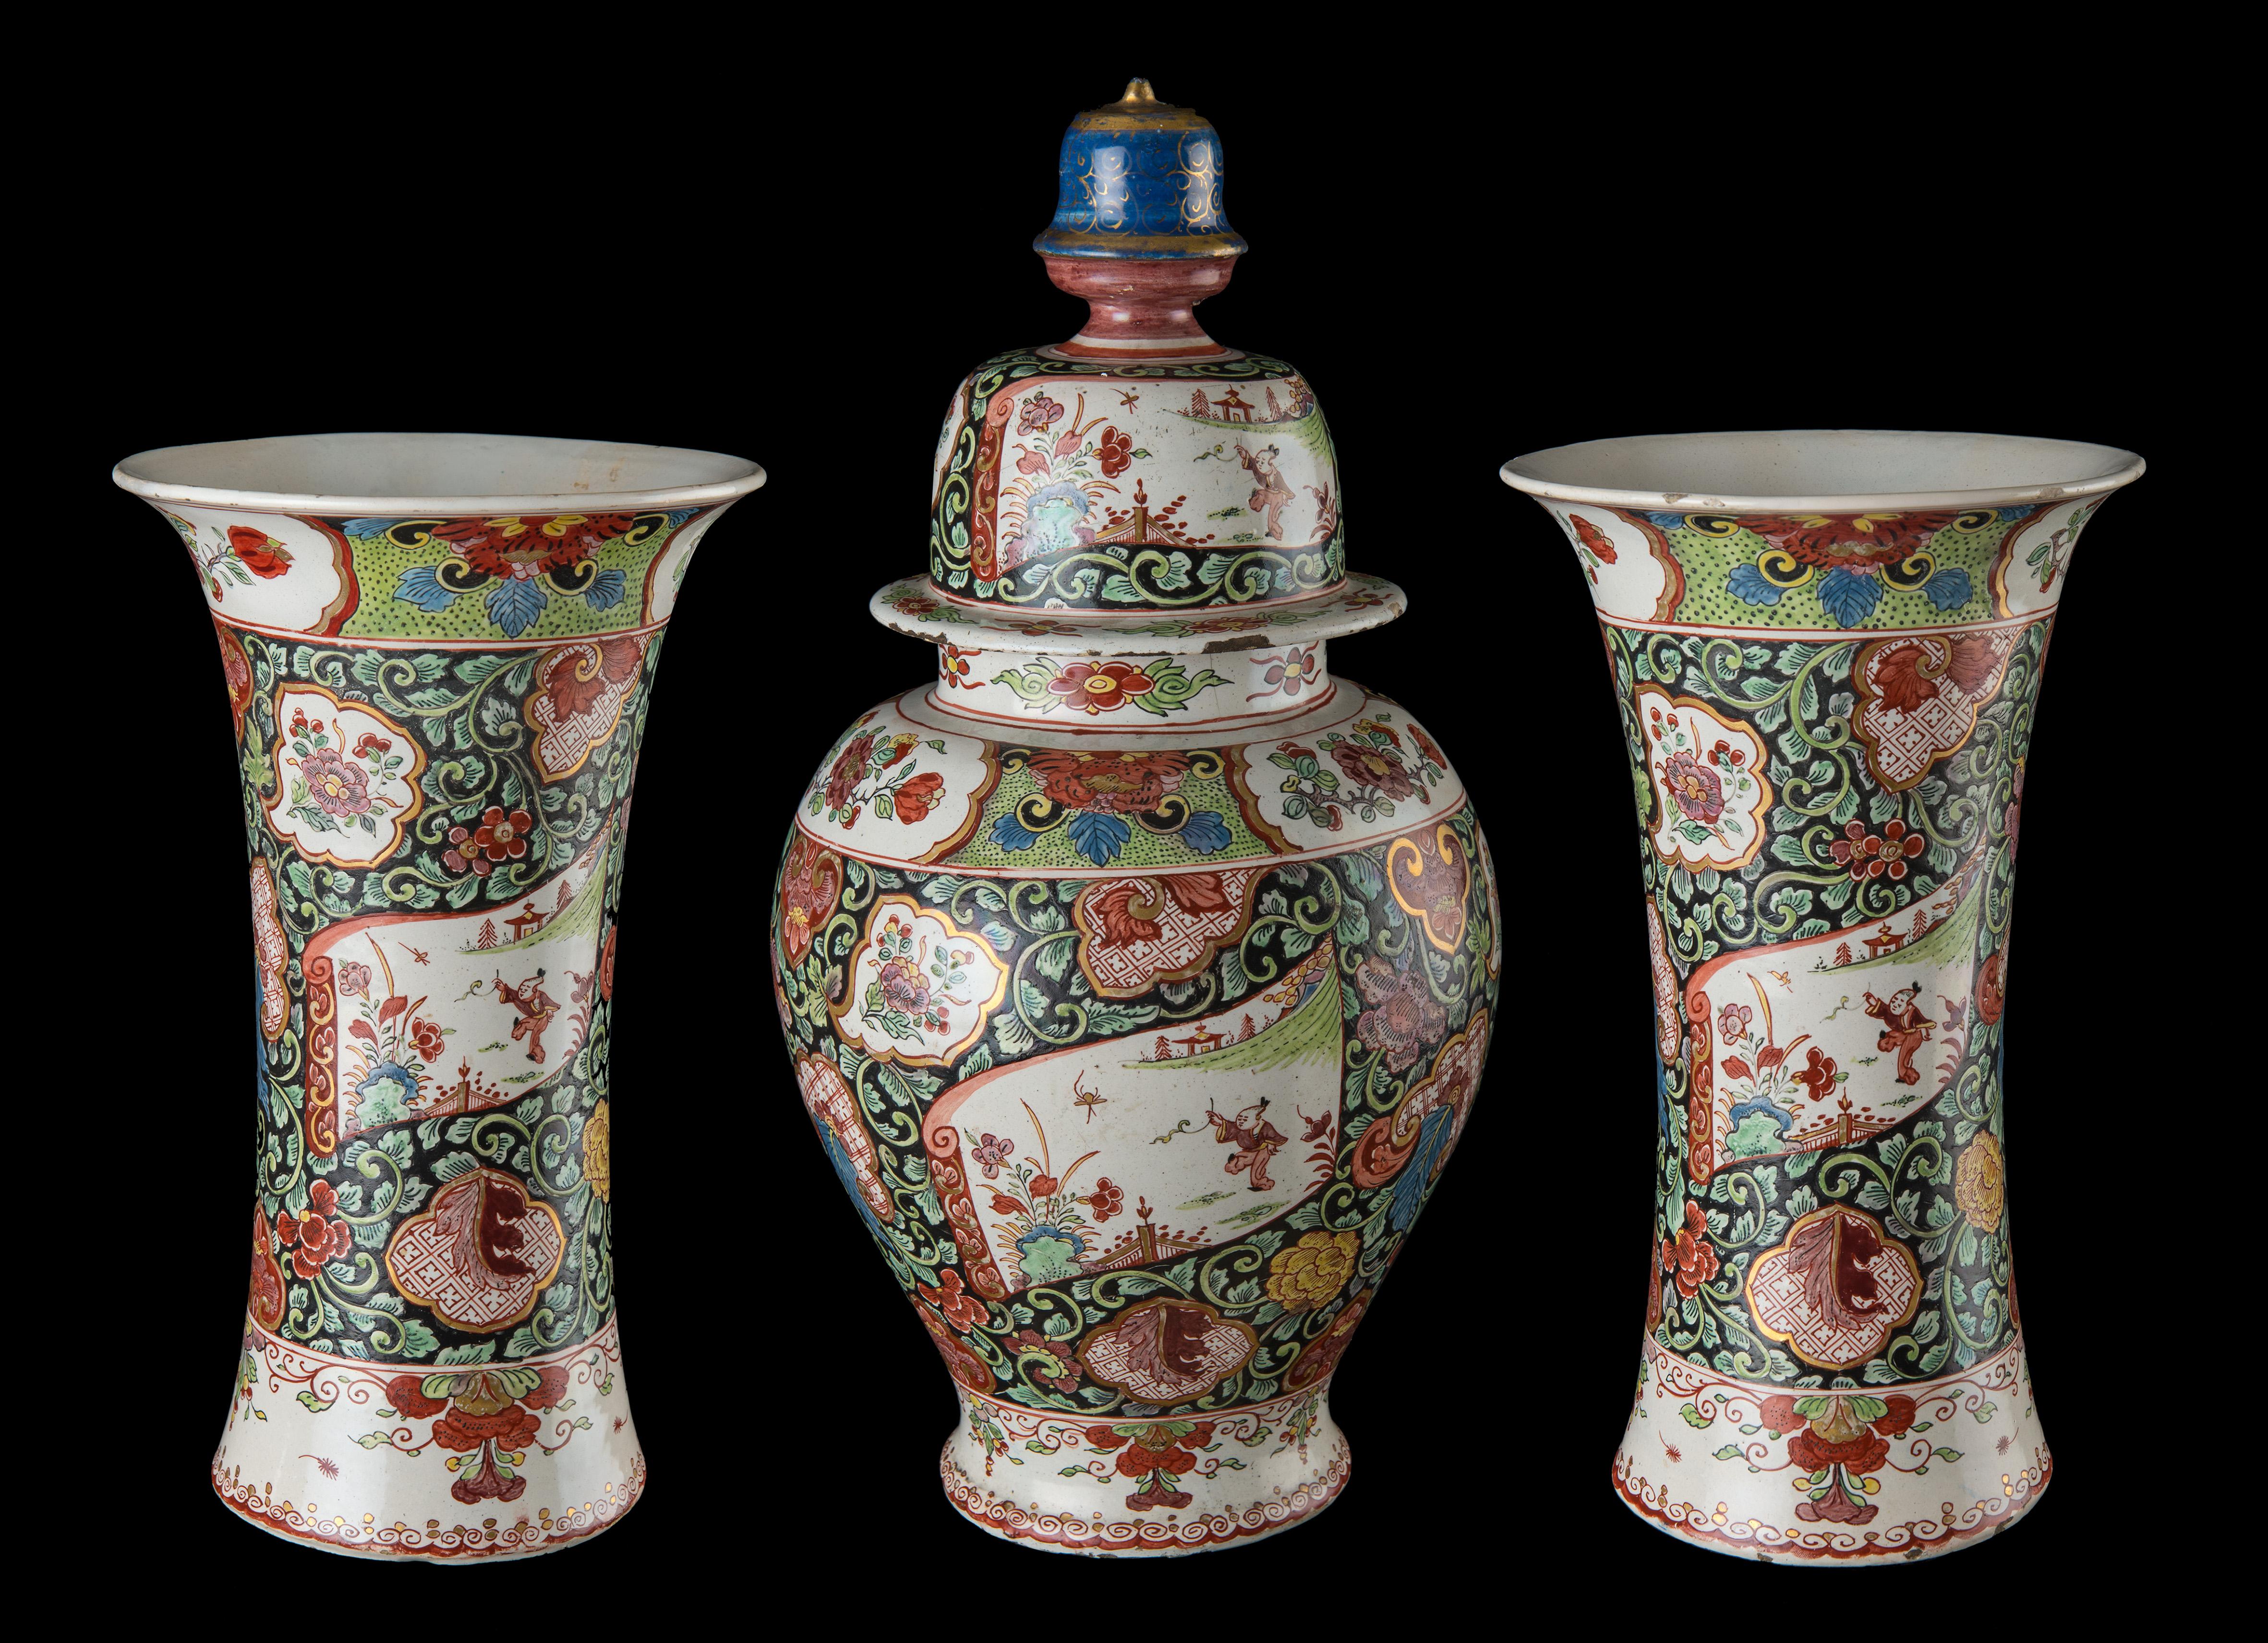 3 piece chinoiserie Famille rose garniture, Delft, 1730-1740

This petit feu garniture consists of a baluster vase with cover and two beaker vases. The cover has a bell-shaped knob. The baluster vase is decorated with three scroll-shaped panels,